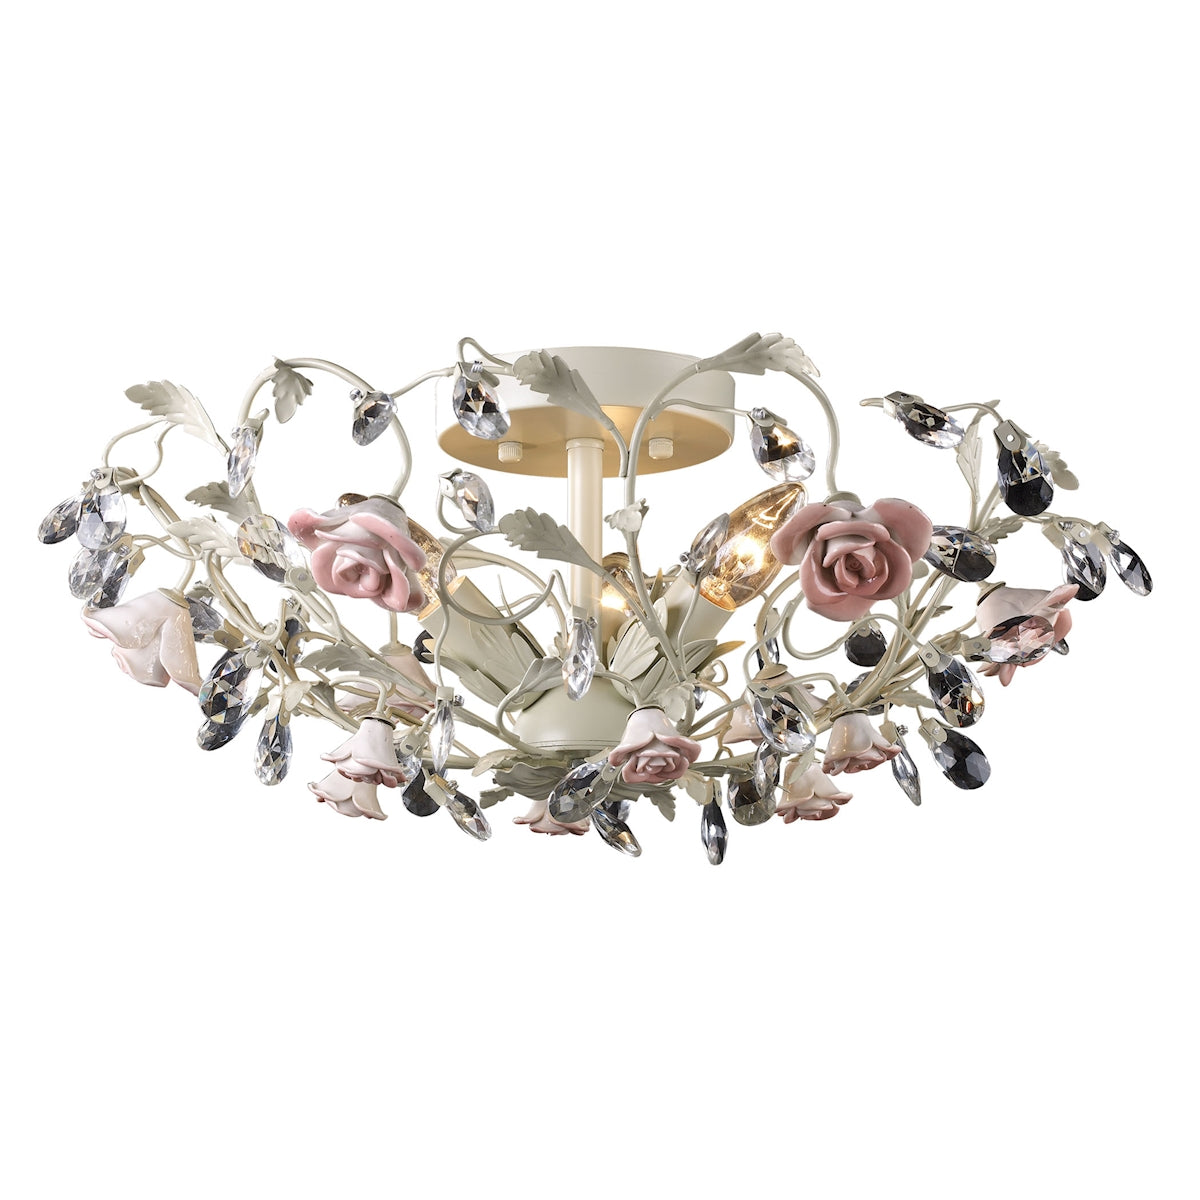 ELK Lighting 18096/3 Heritage 3-Light Semi Flush in Cream with Porcelain Roses and Crystal